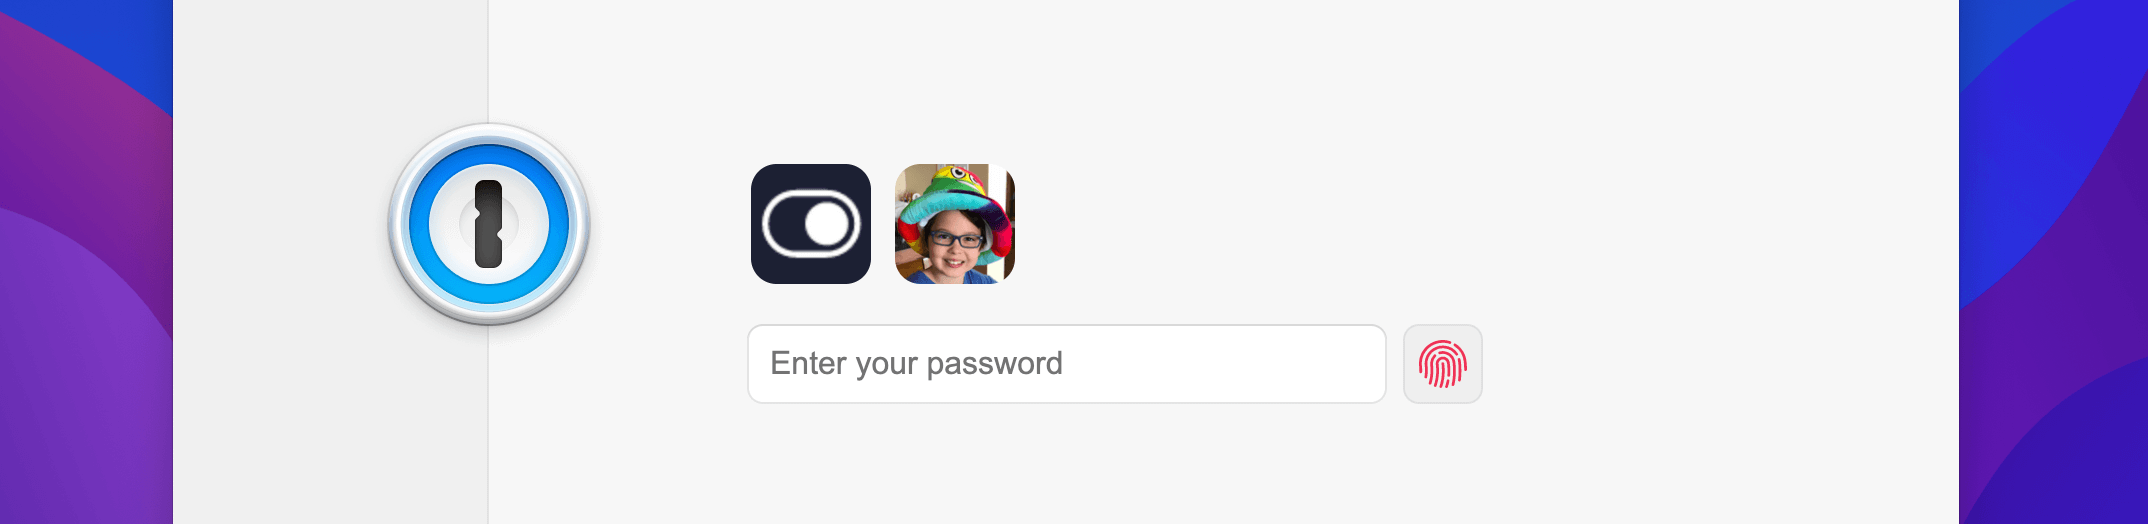 1Password lock screen showing multiple accounts and a button to activate TouchID